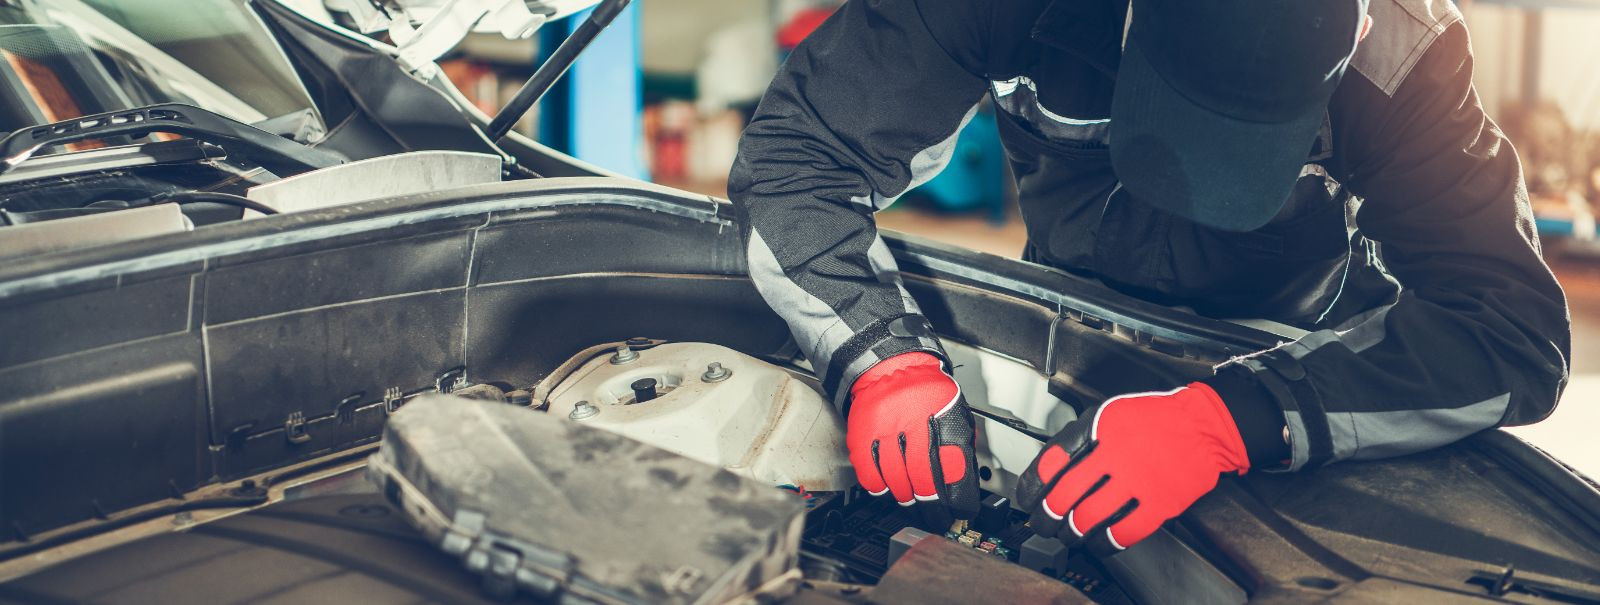 Maintaining your vehicle is akin to maintaining your health; regular check-ups can prevent major issues and extend the life of your car. For our valued customer